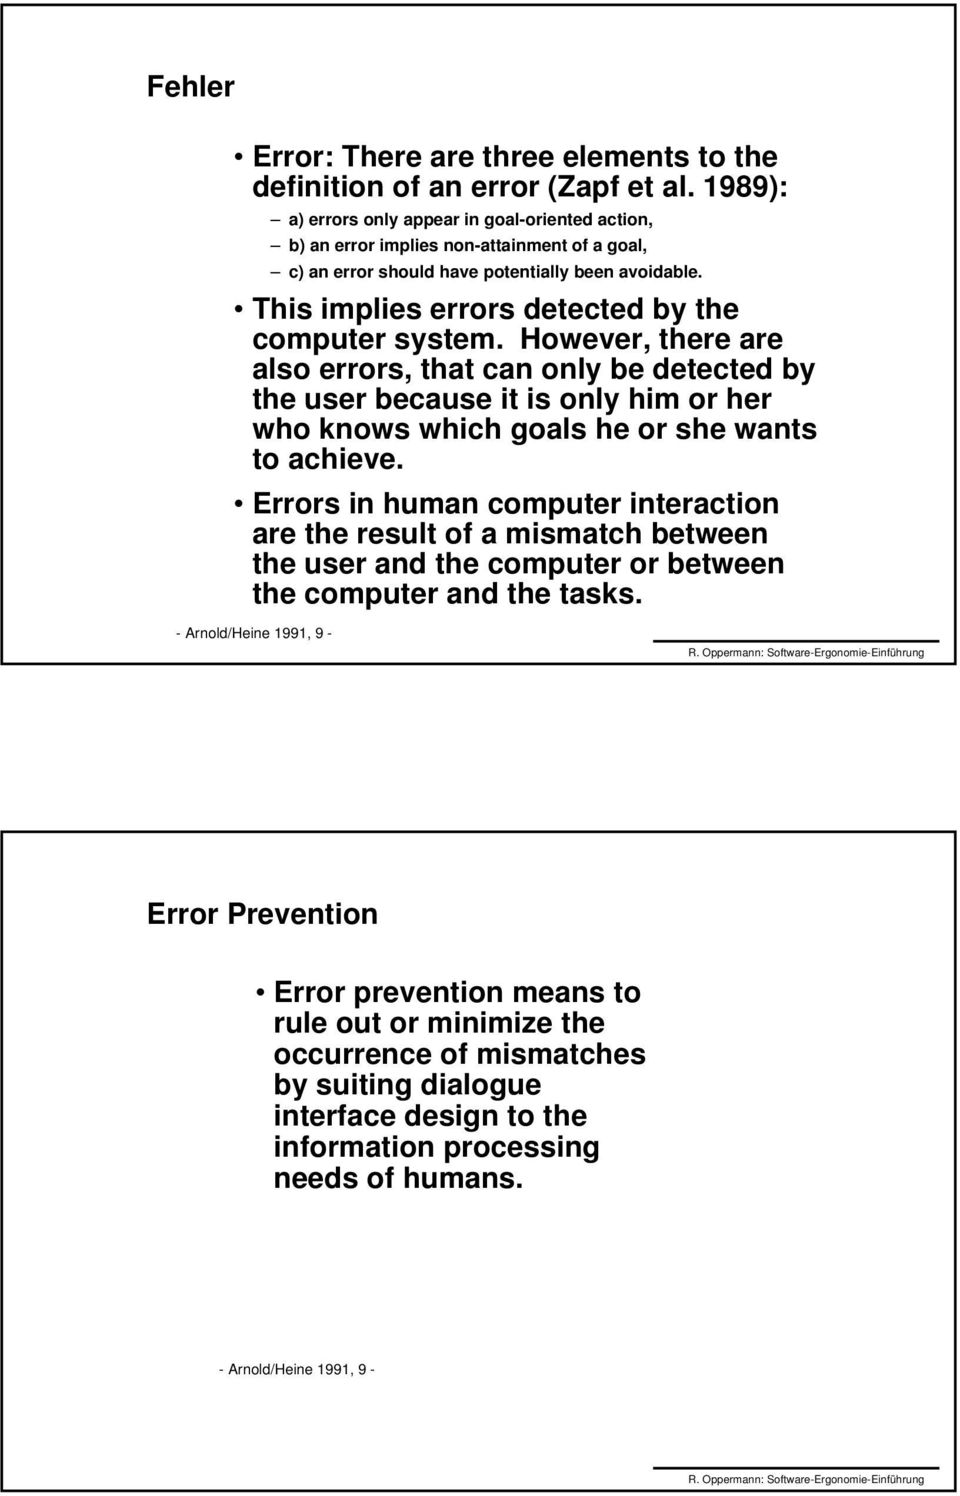 This implies errors detected by the computer system.